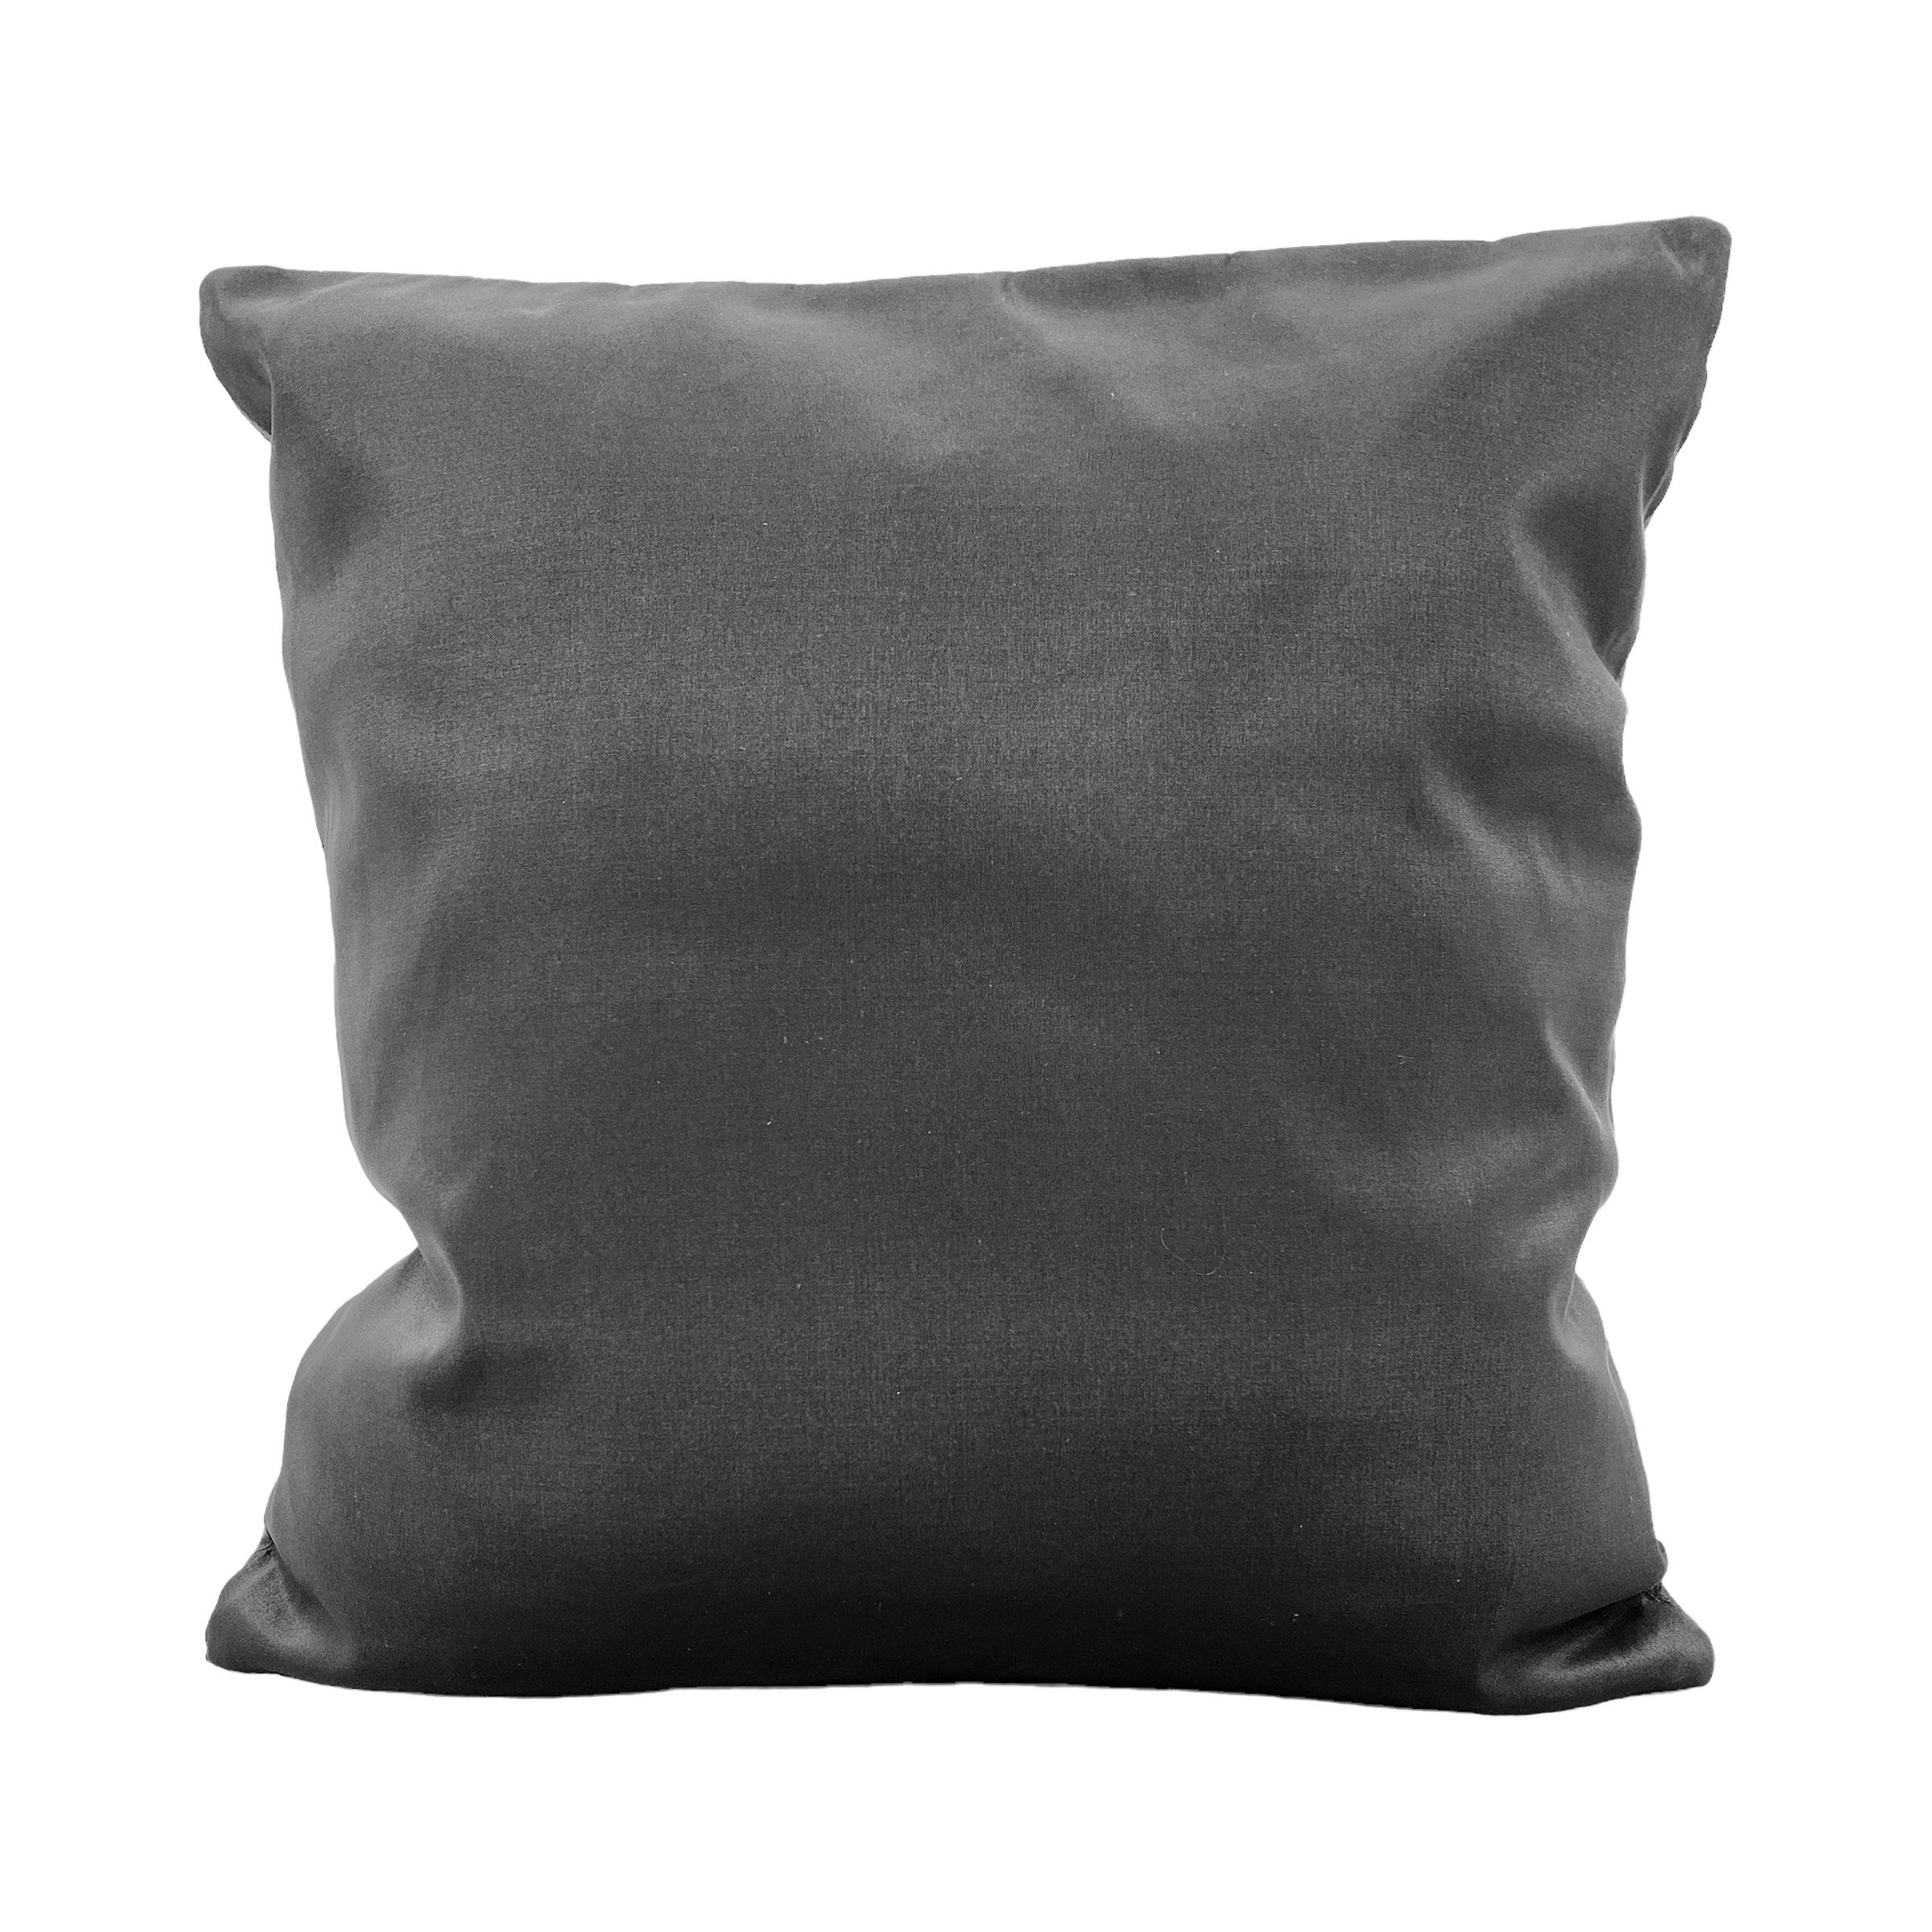 Genuine Wrinkled Black Leather Pillows For Sale 1